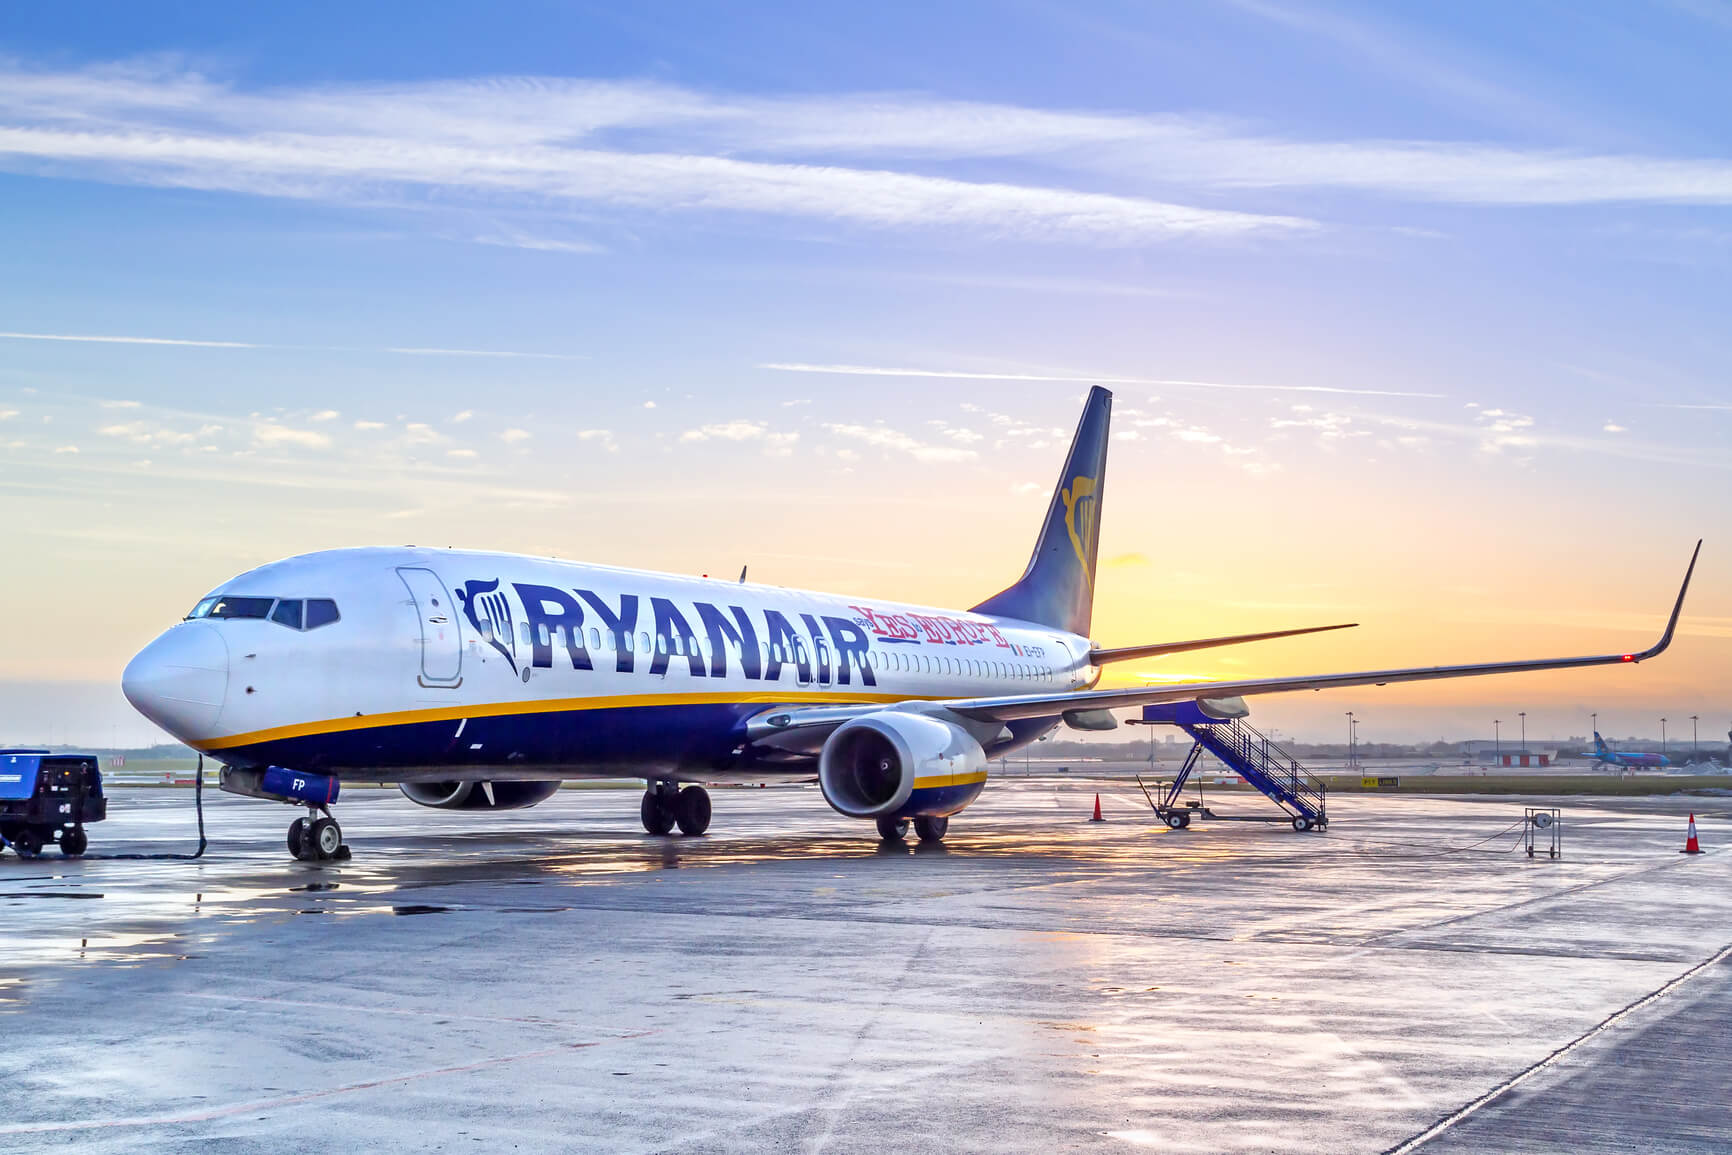 <div class='expired'>EXPIRED</div>PROMO: Ryanair flights across Europe from only €4 / £5 one-way (Mar-Apr dates) | Secret Flying